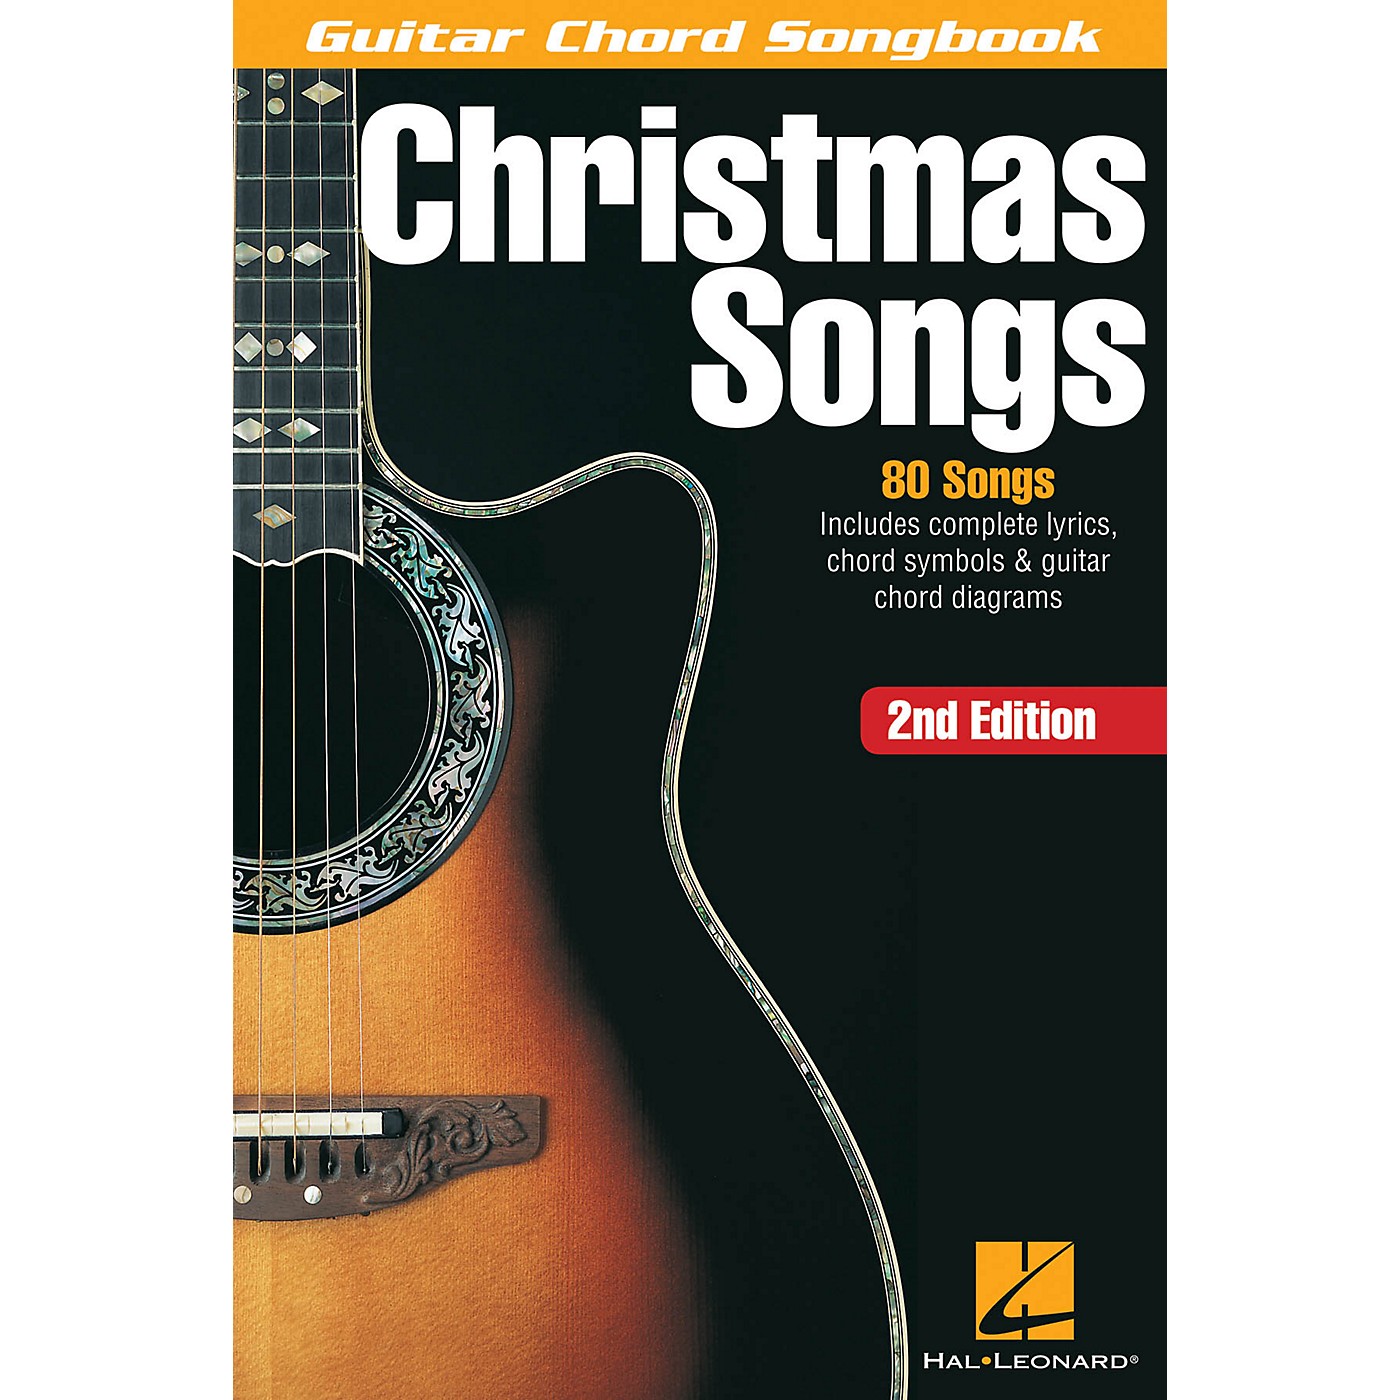 Hal Leonard Christmas Songs - 2nd Edition Guitar Chord Songbook Series Softcover thumbnail